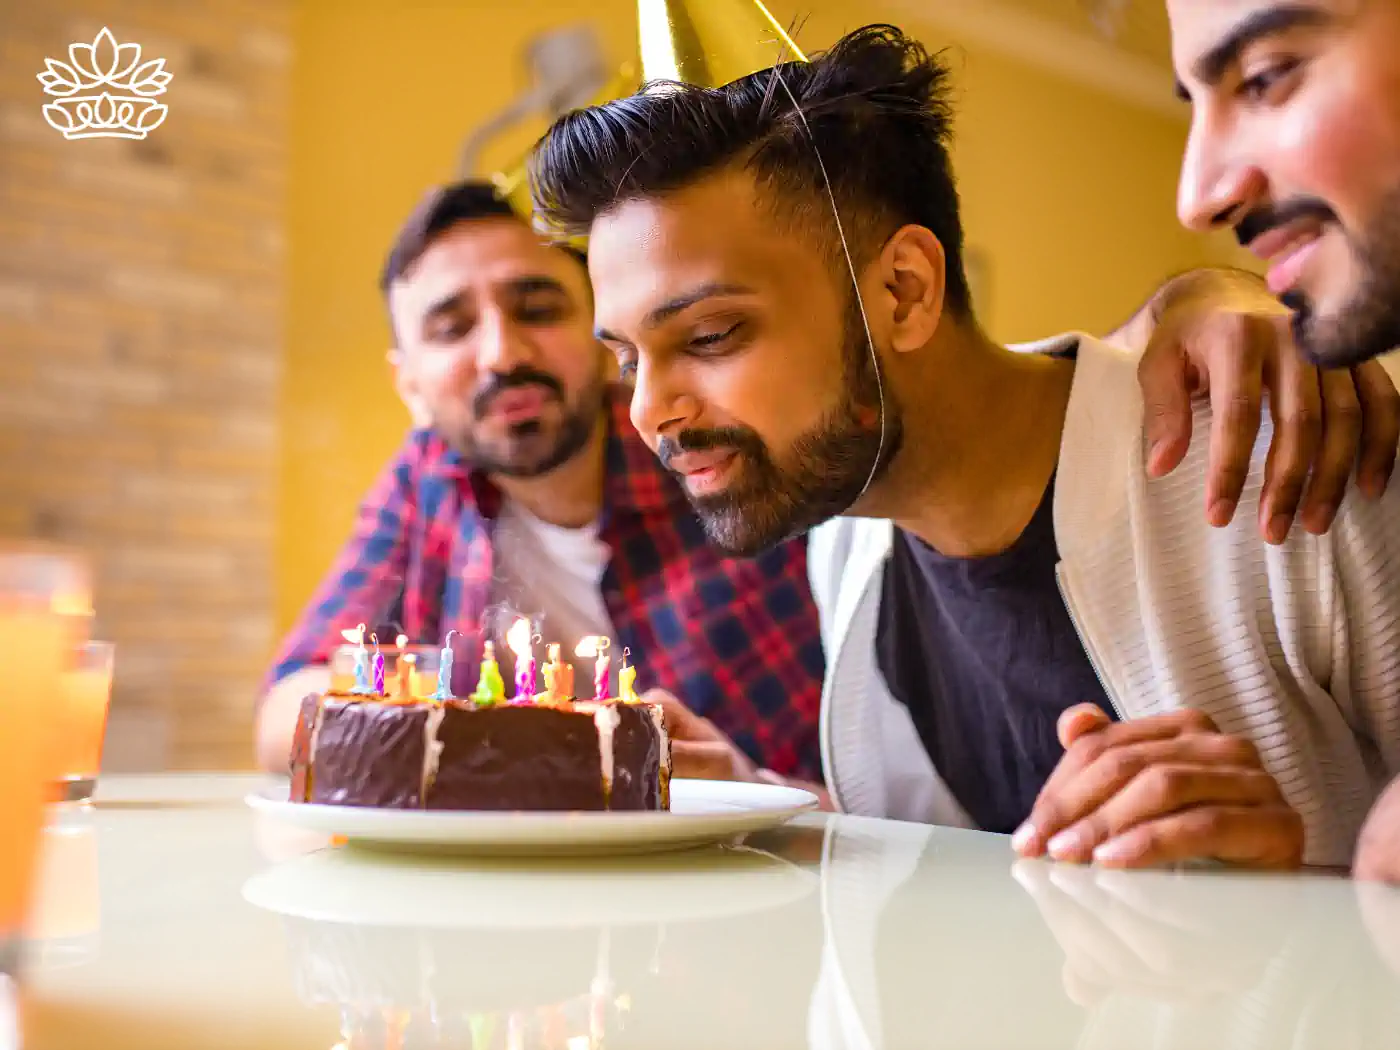 Three men gathered around a birthday cake with lit candles, making a wish - Fabulous Flowers and Gifts, Sagittarius Flowers and Gifts